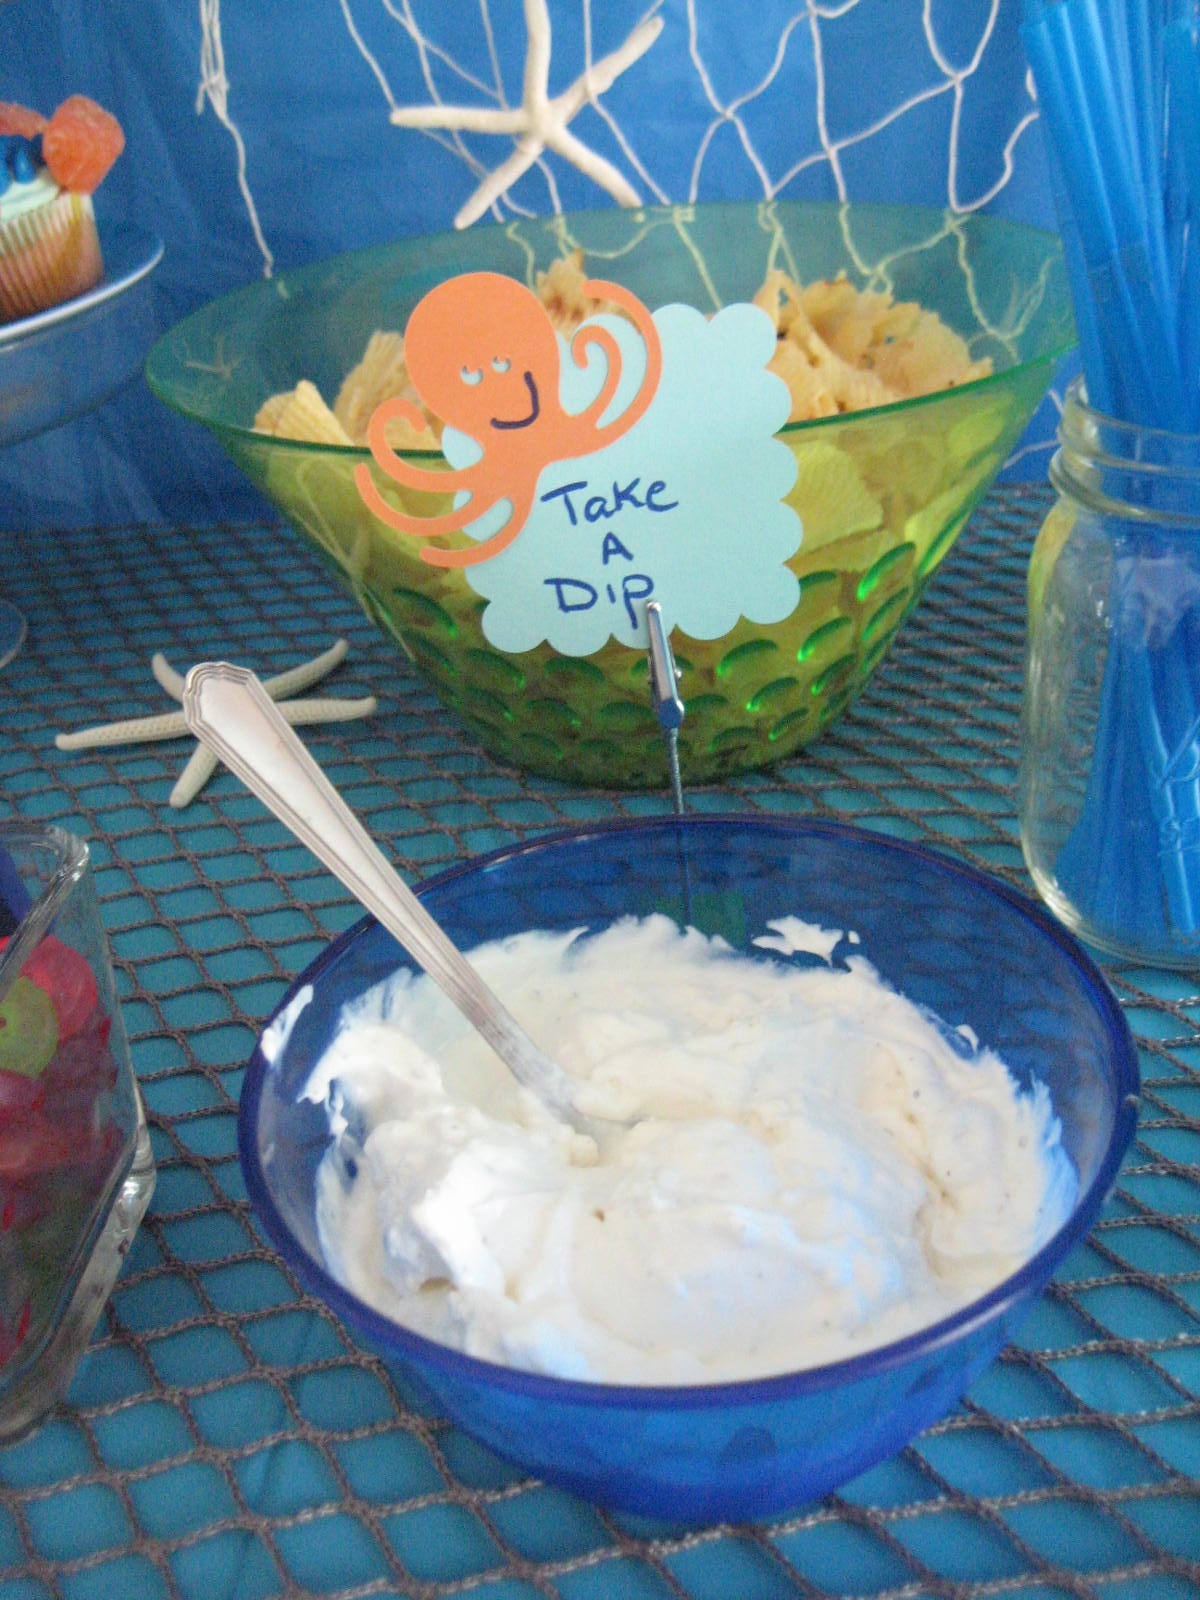 Creative Party Ideas by Cheryl: Pool Party